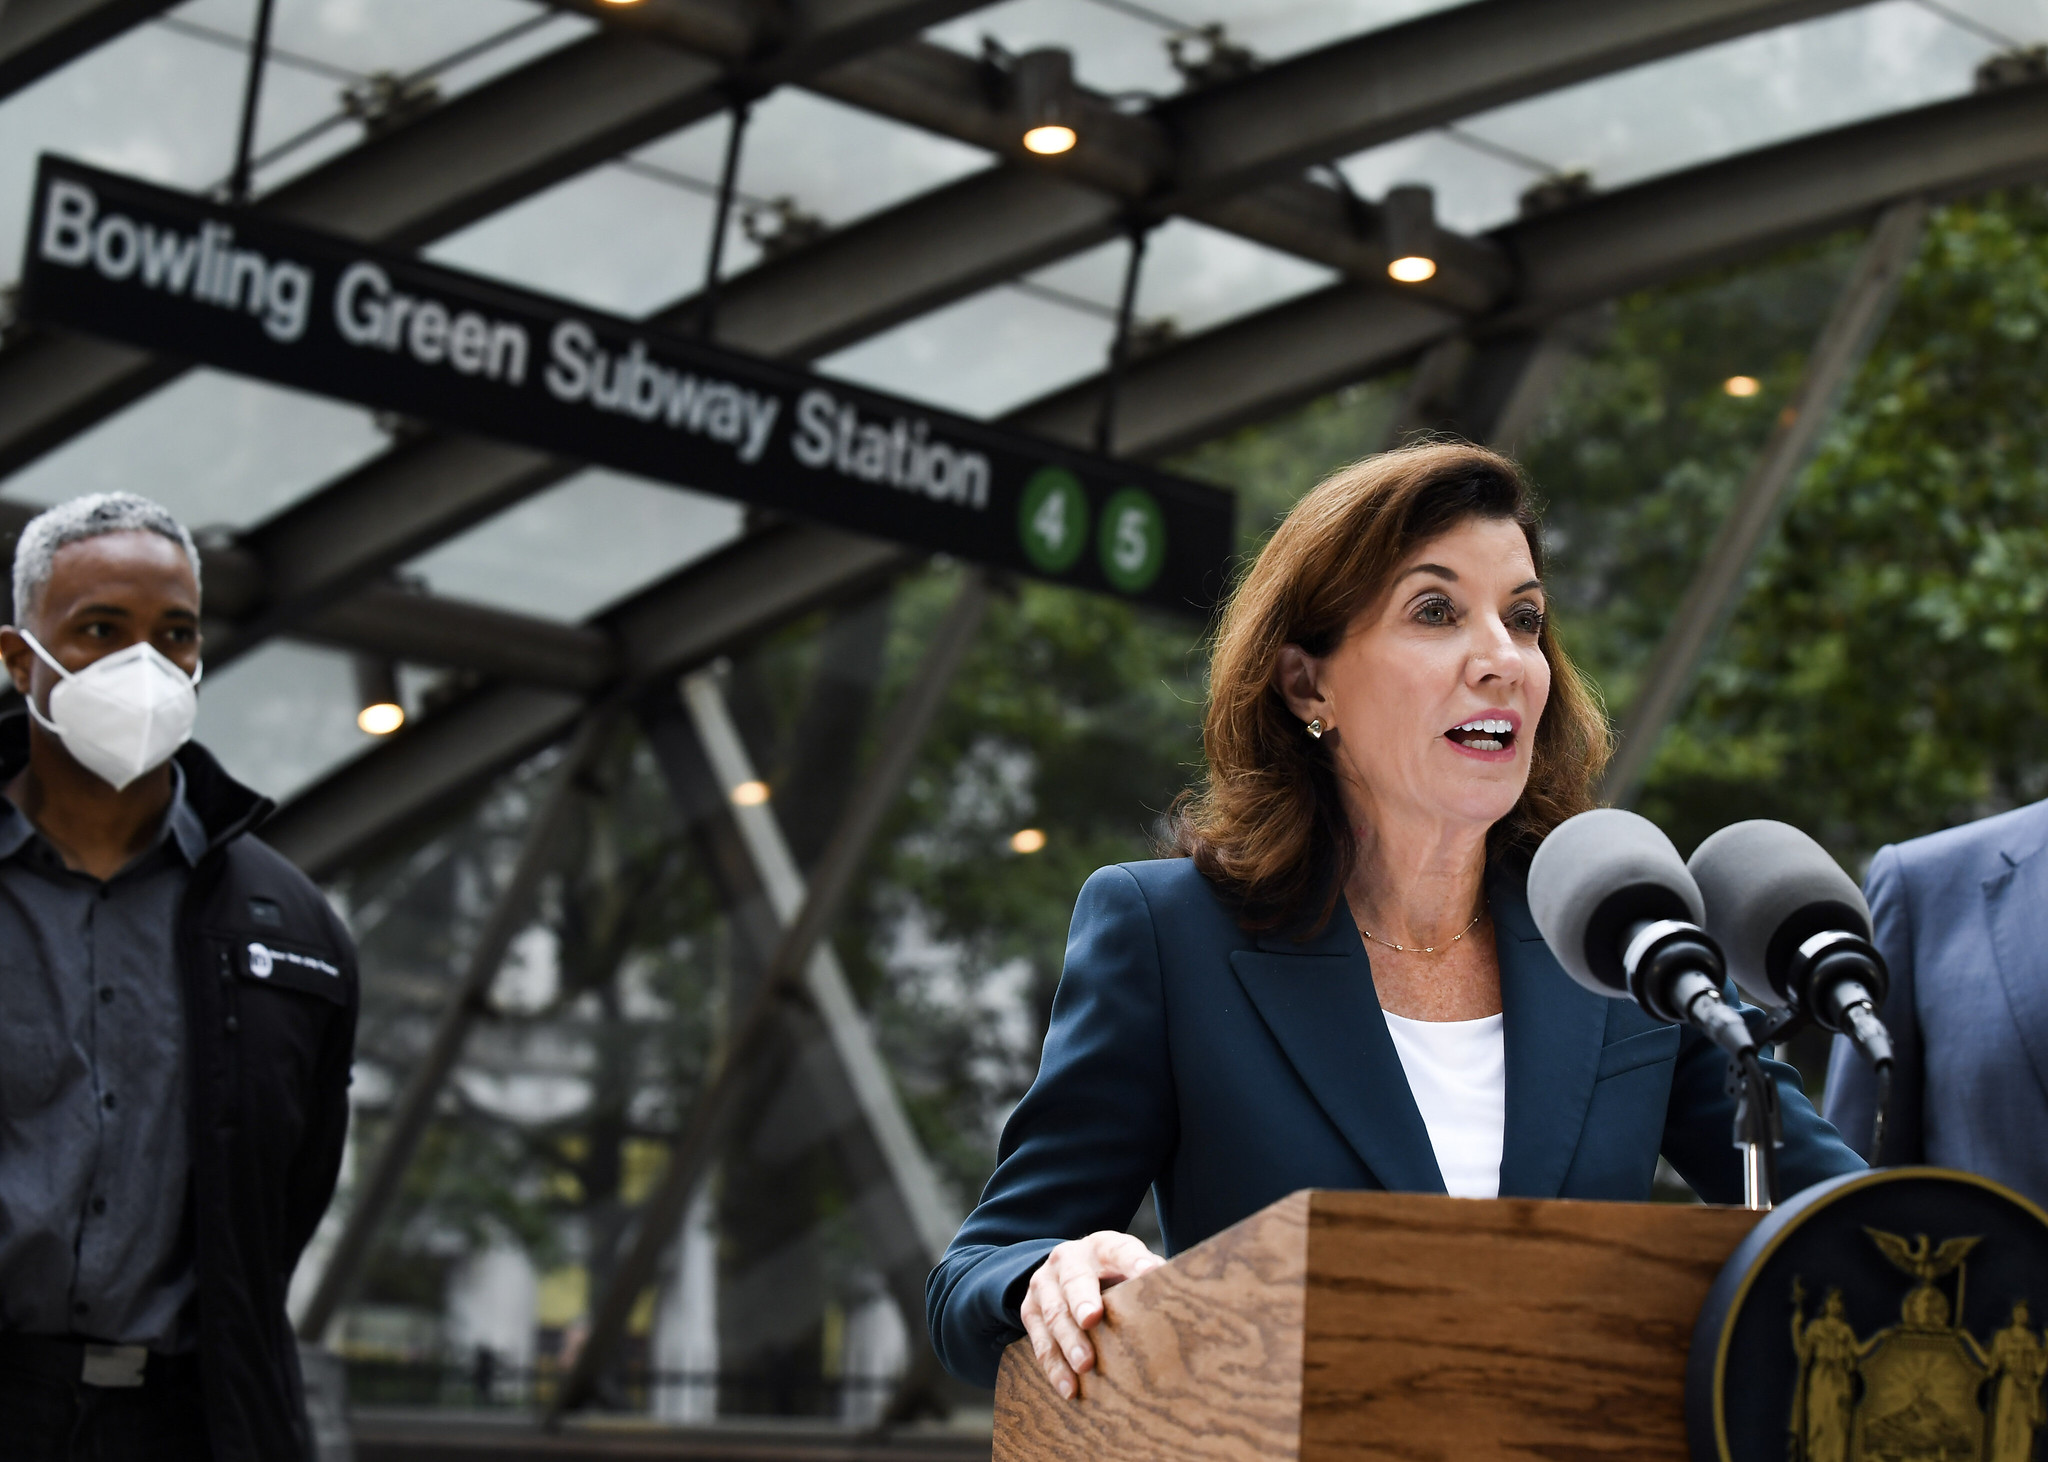 Governor Hochul, in a blue suit and white shirt, stands at a lectern outside the Bowling Greene Subway Station entrance